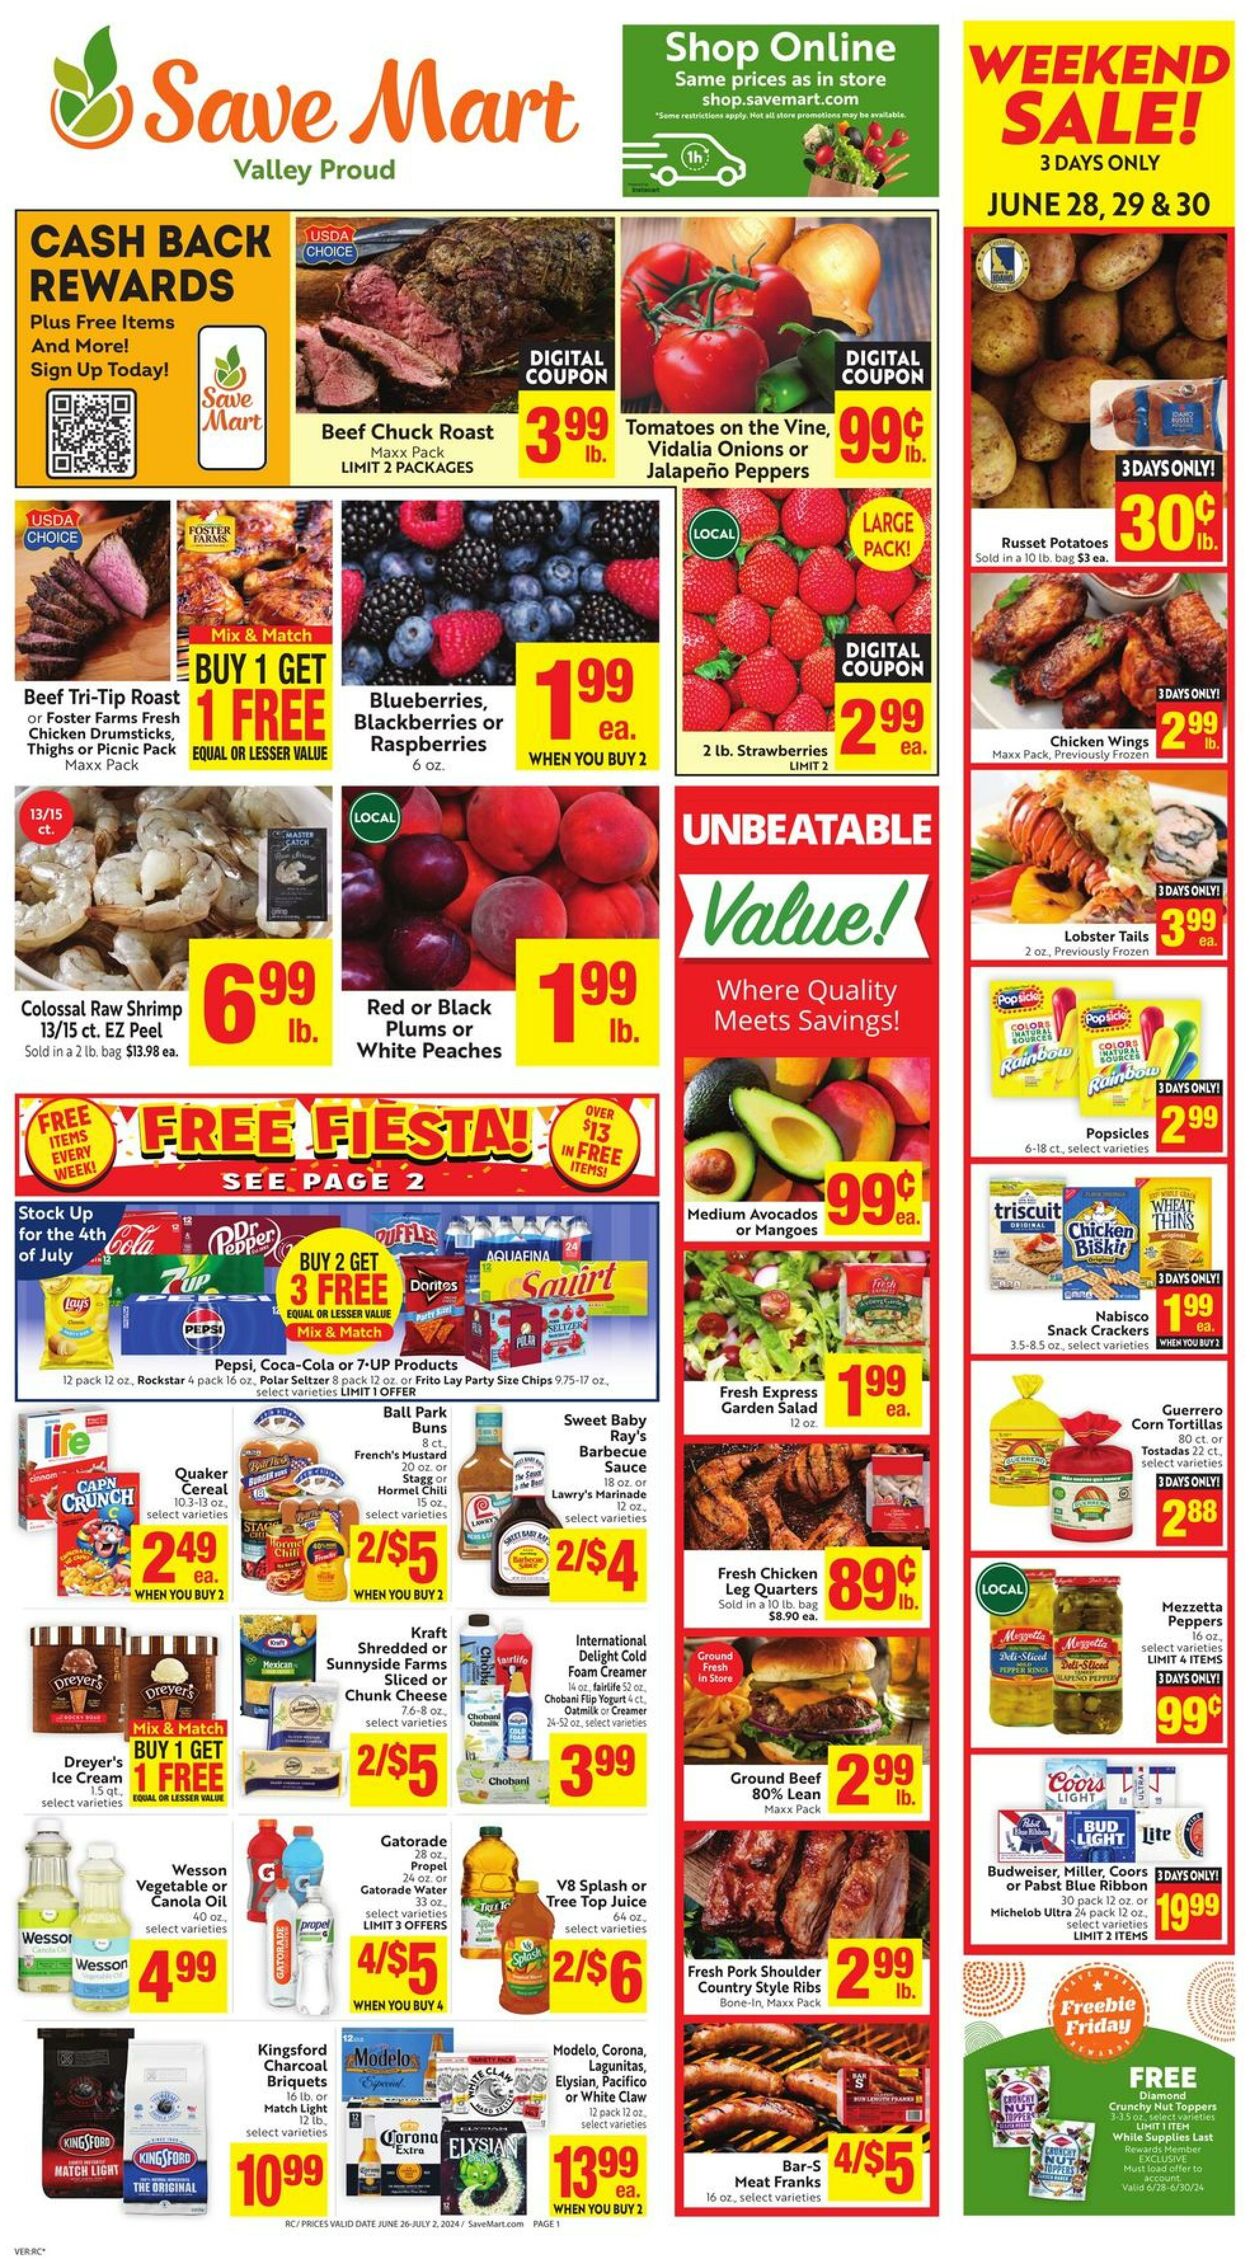 Save Mart Promotional weekly ads